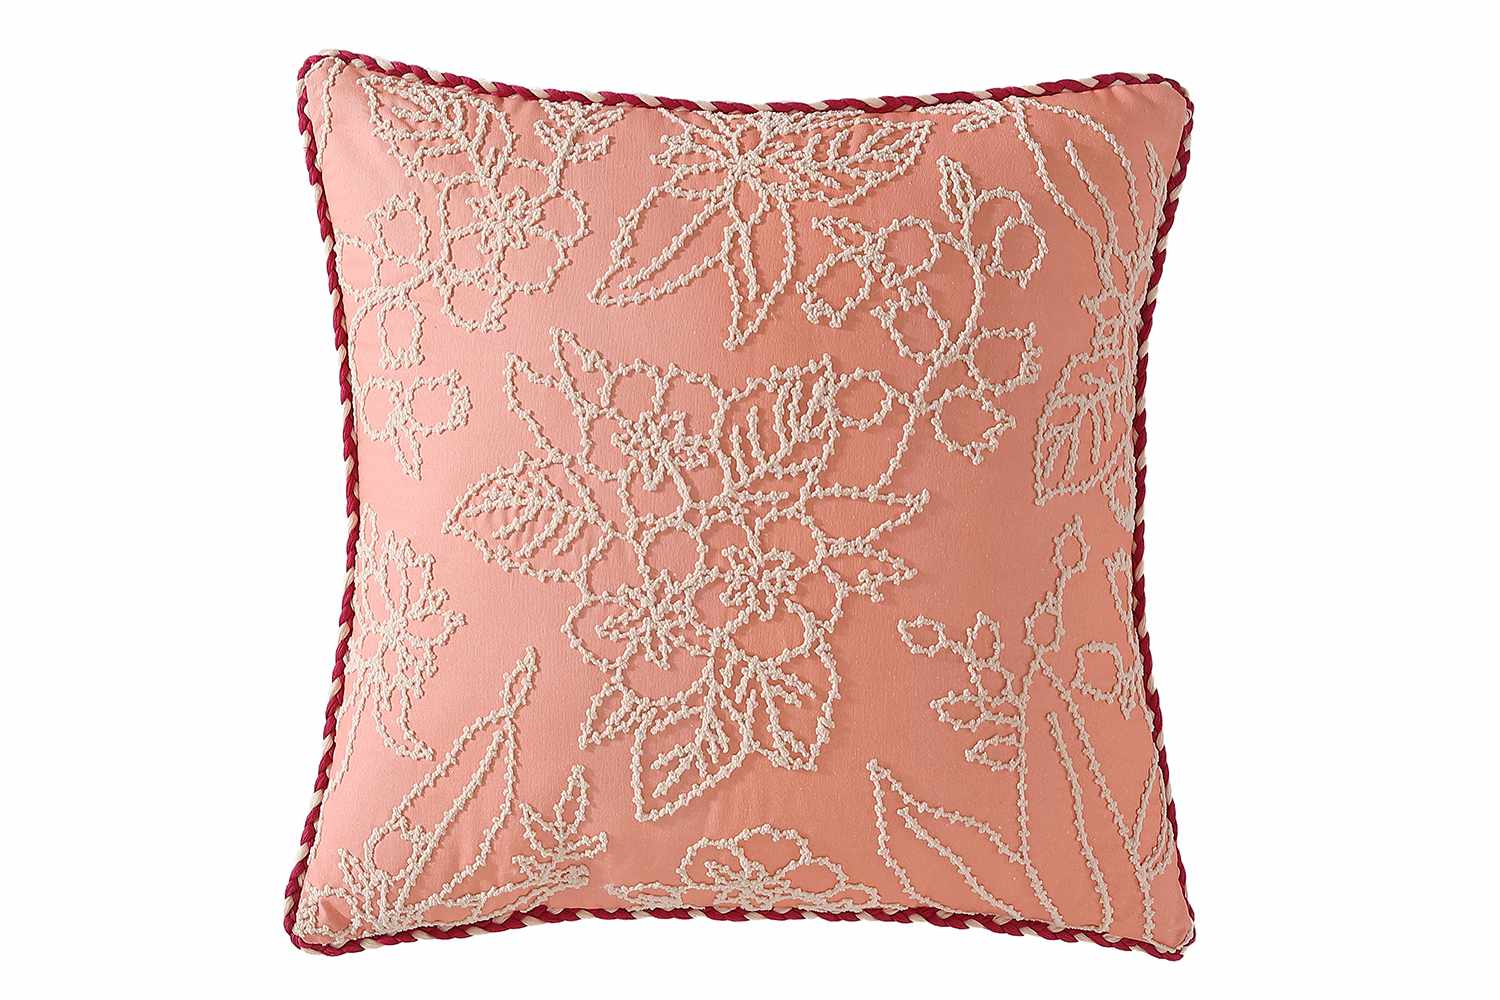 Embroidered Floral Toile Decorative Pillow